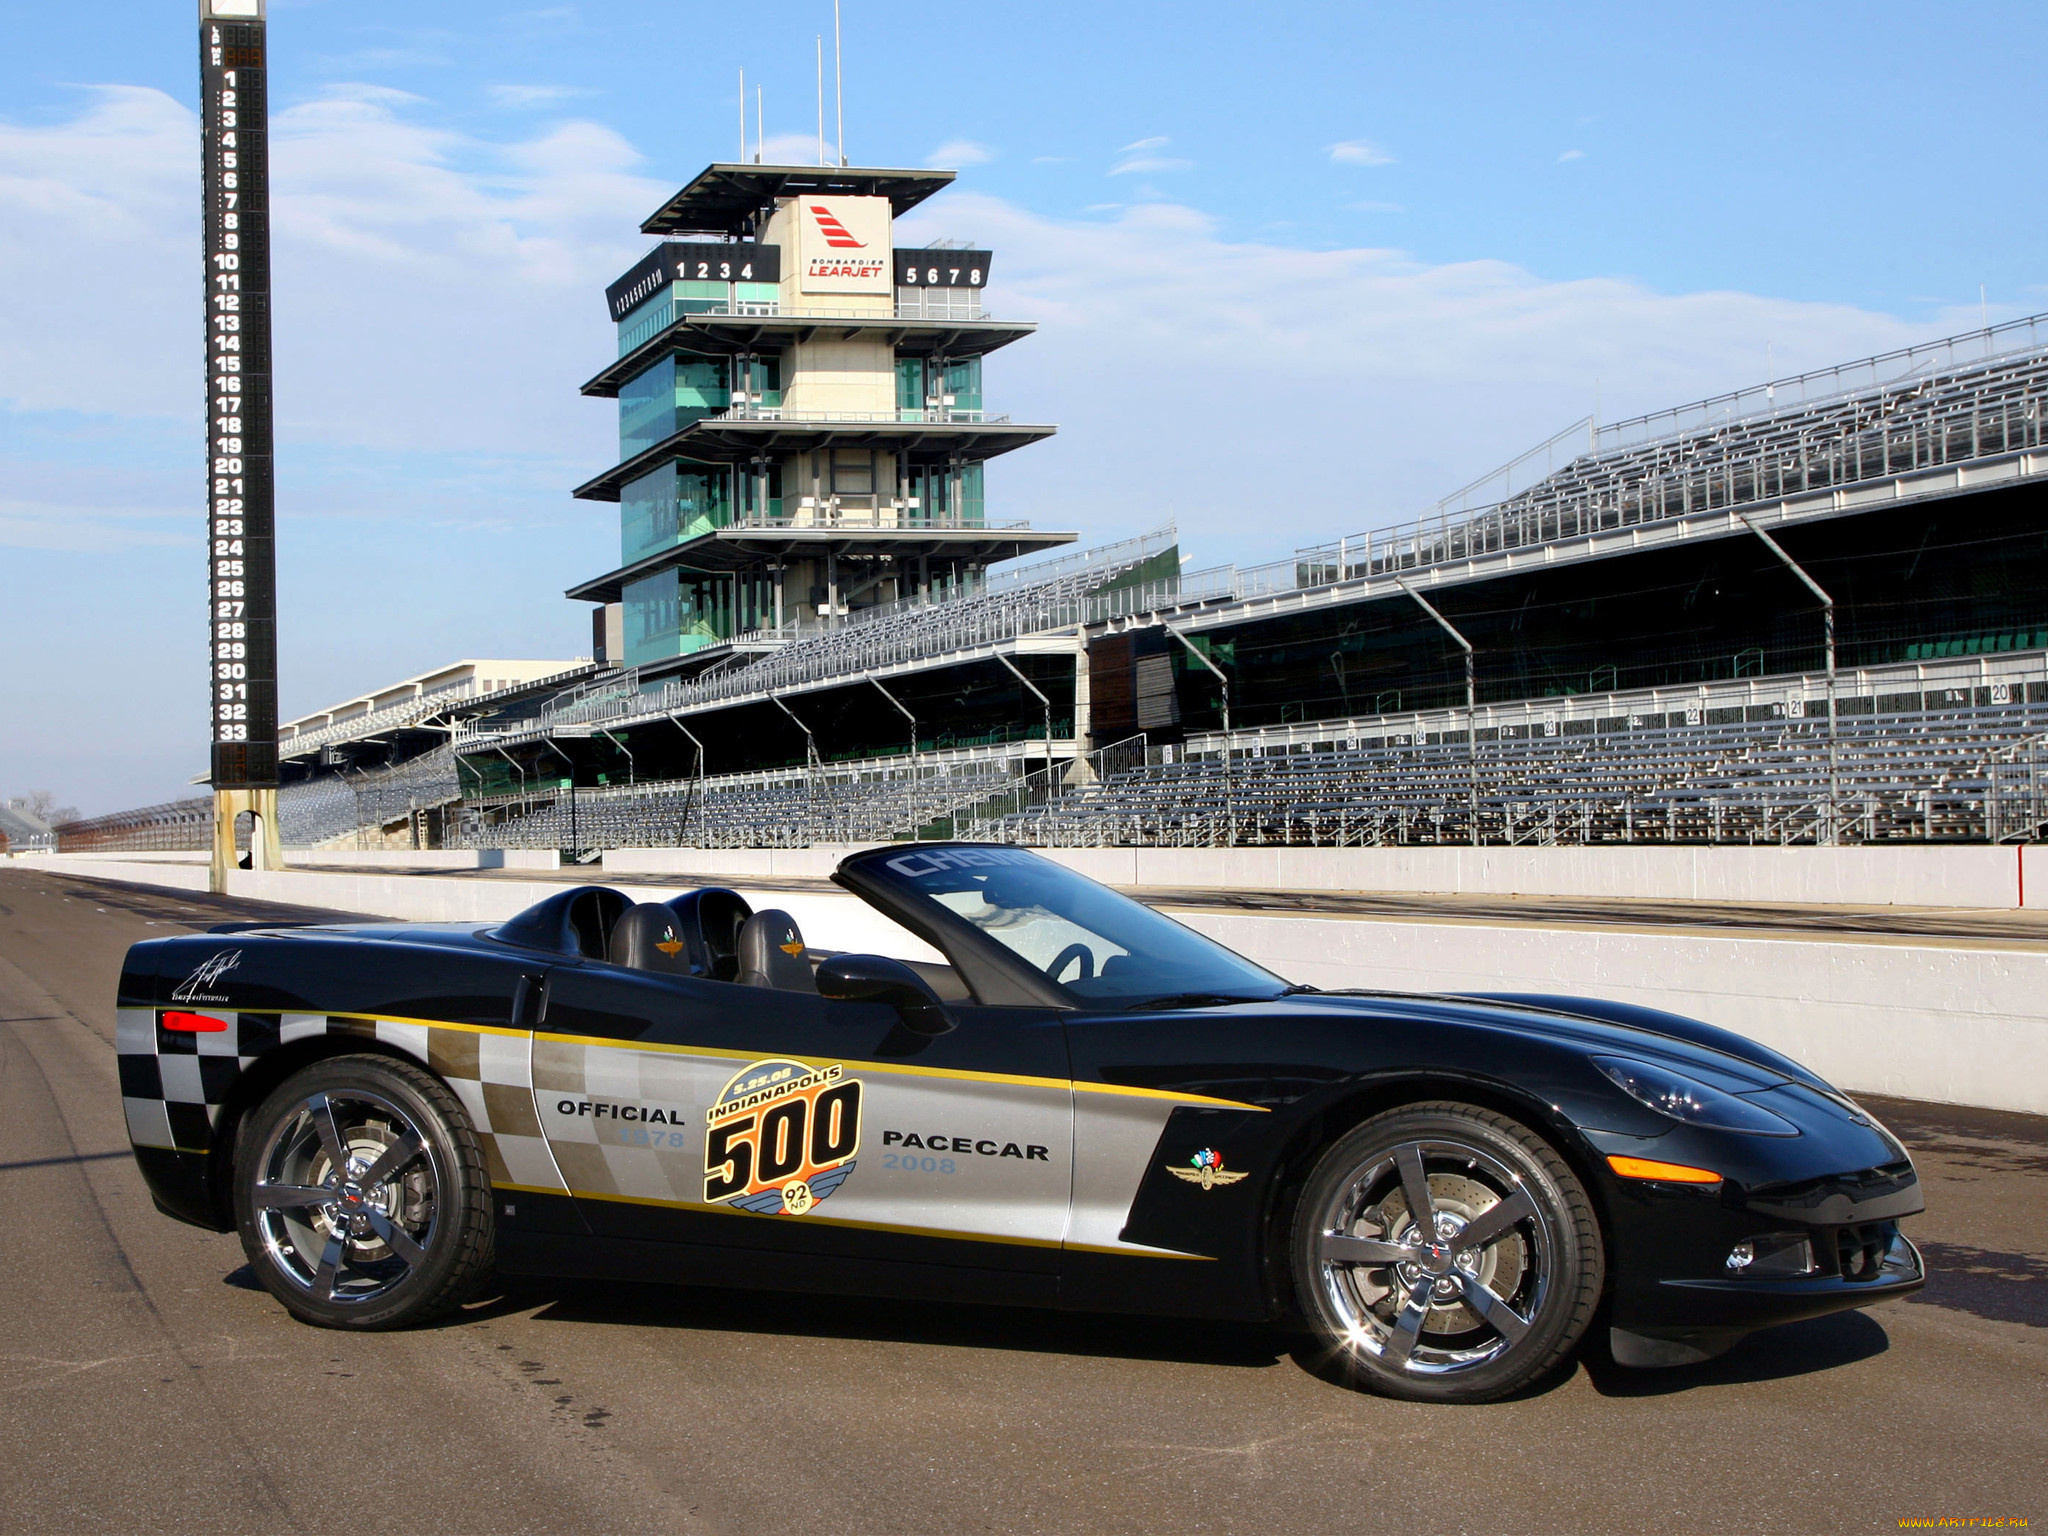 corvette convertible 30th anniversary indy 500 pace car 2008, , corvette, 2008, anniversary, indy, 500, pace, car, 30th, convertible